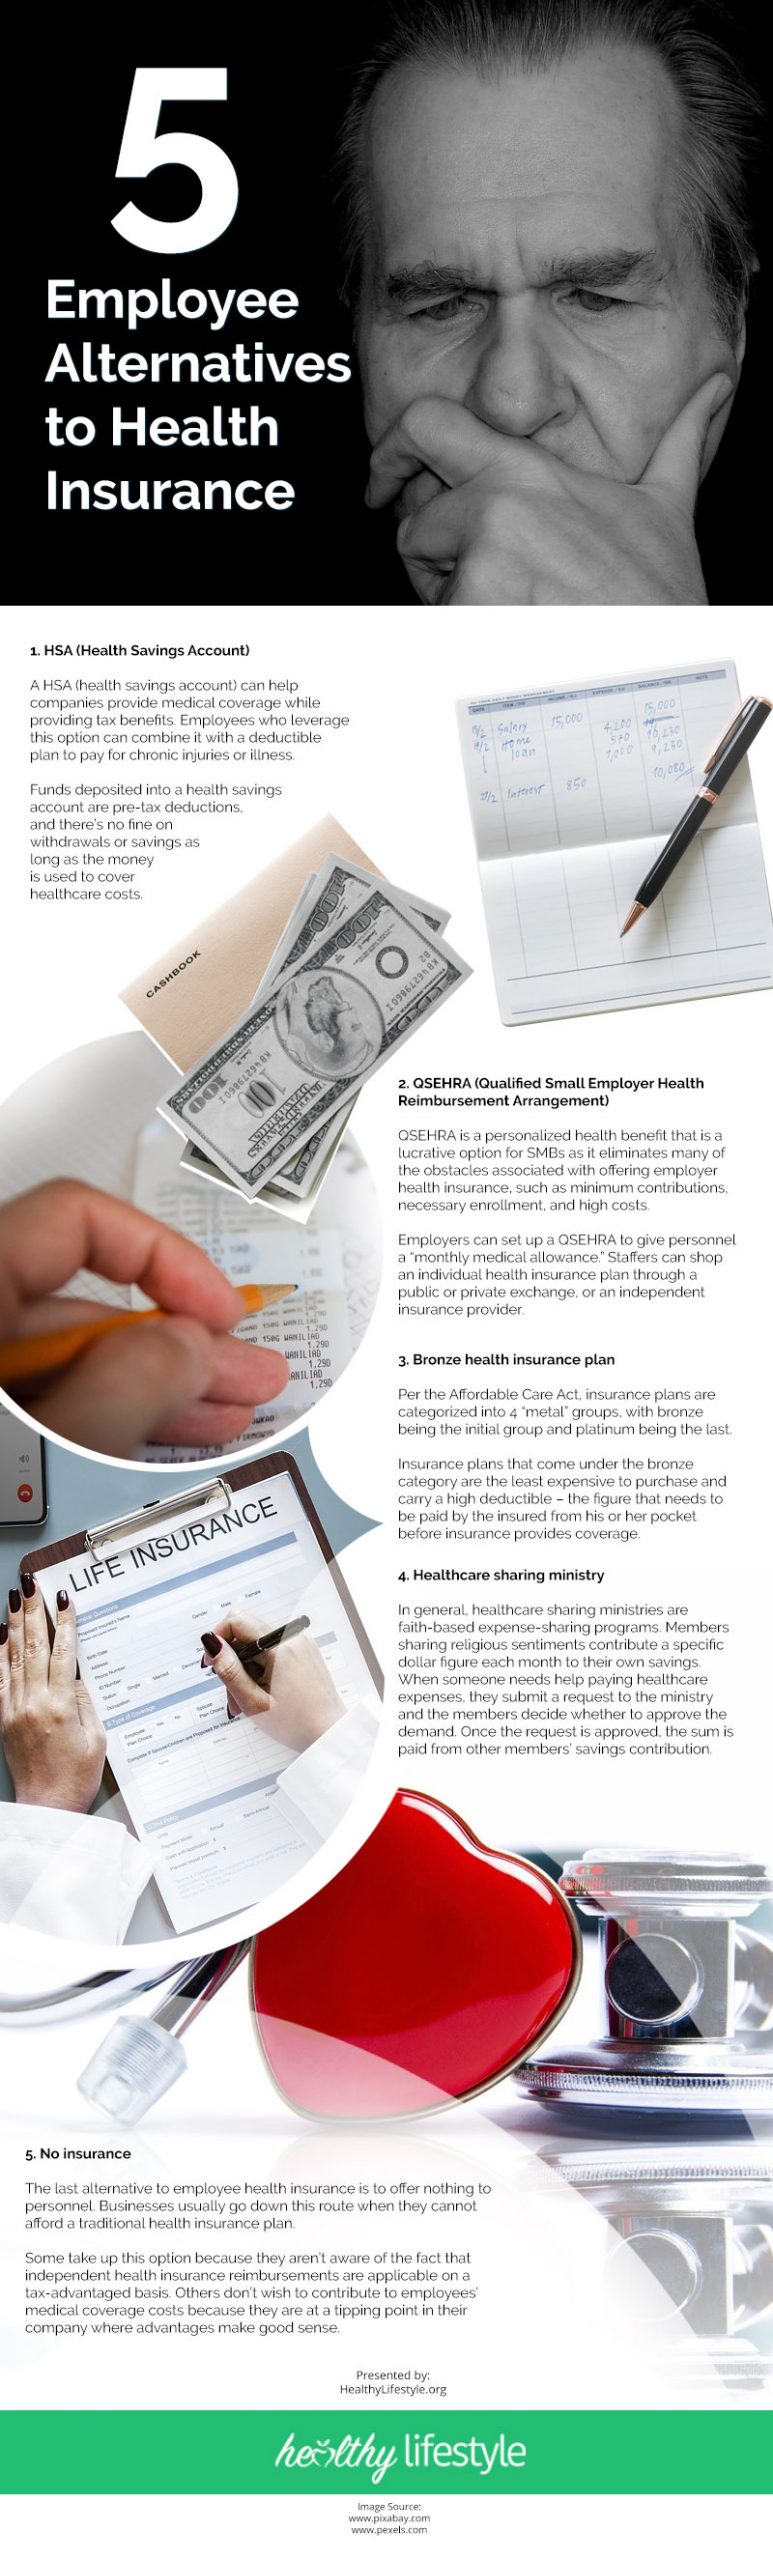 5 Employee Alternatives to Health Insurance Infographic